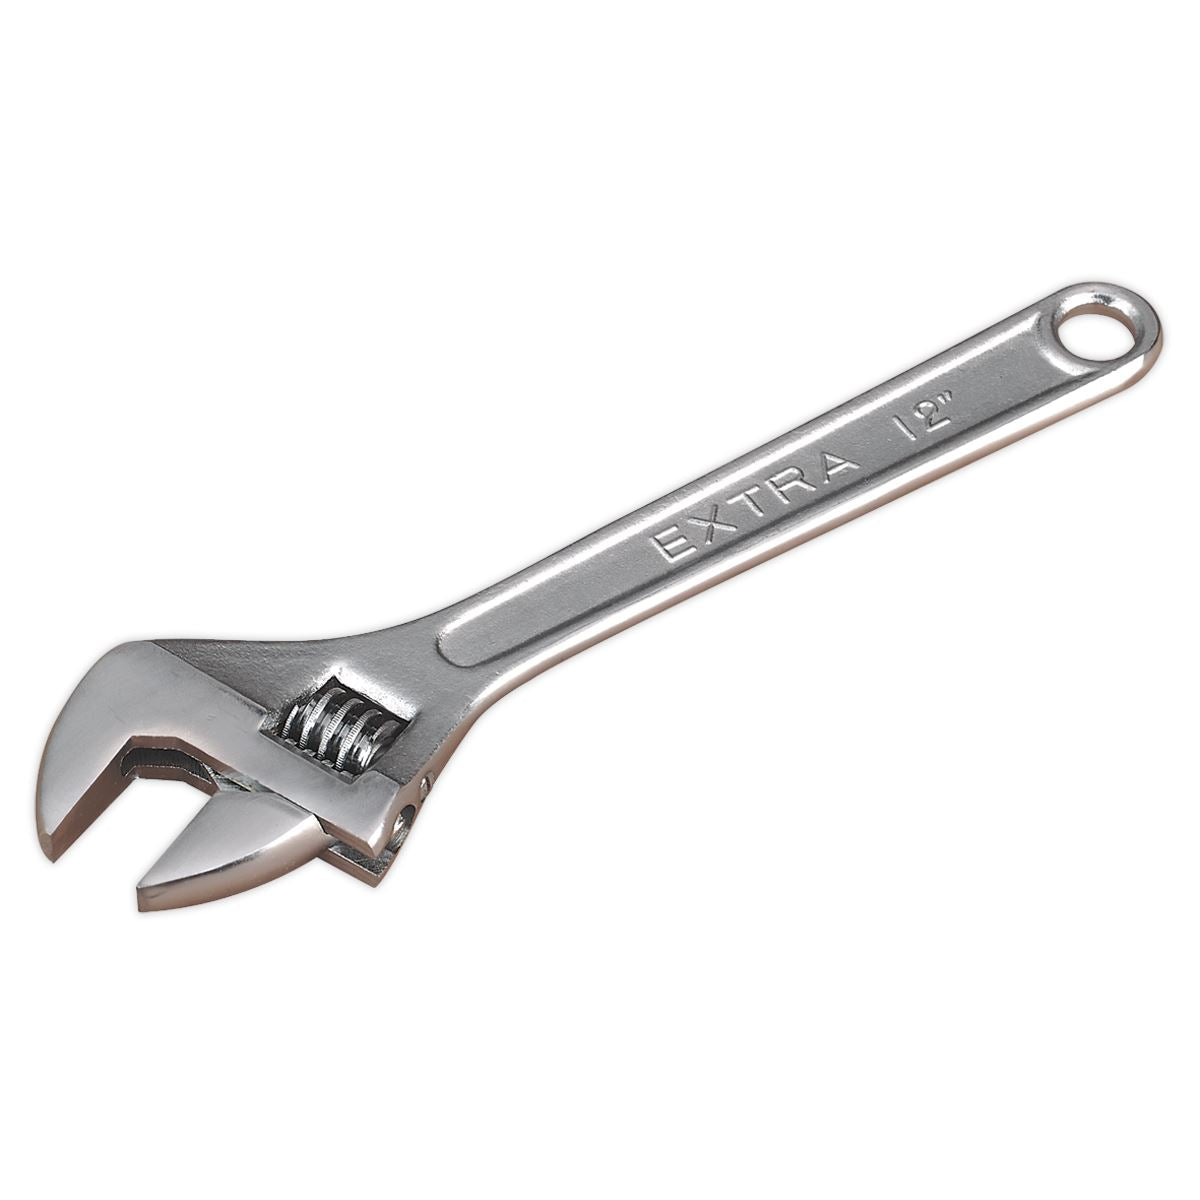 Siegen by Sealey Adjustable Wrench 300mm